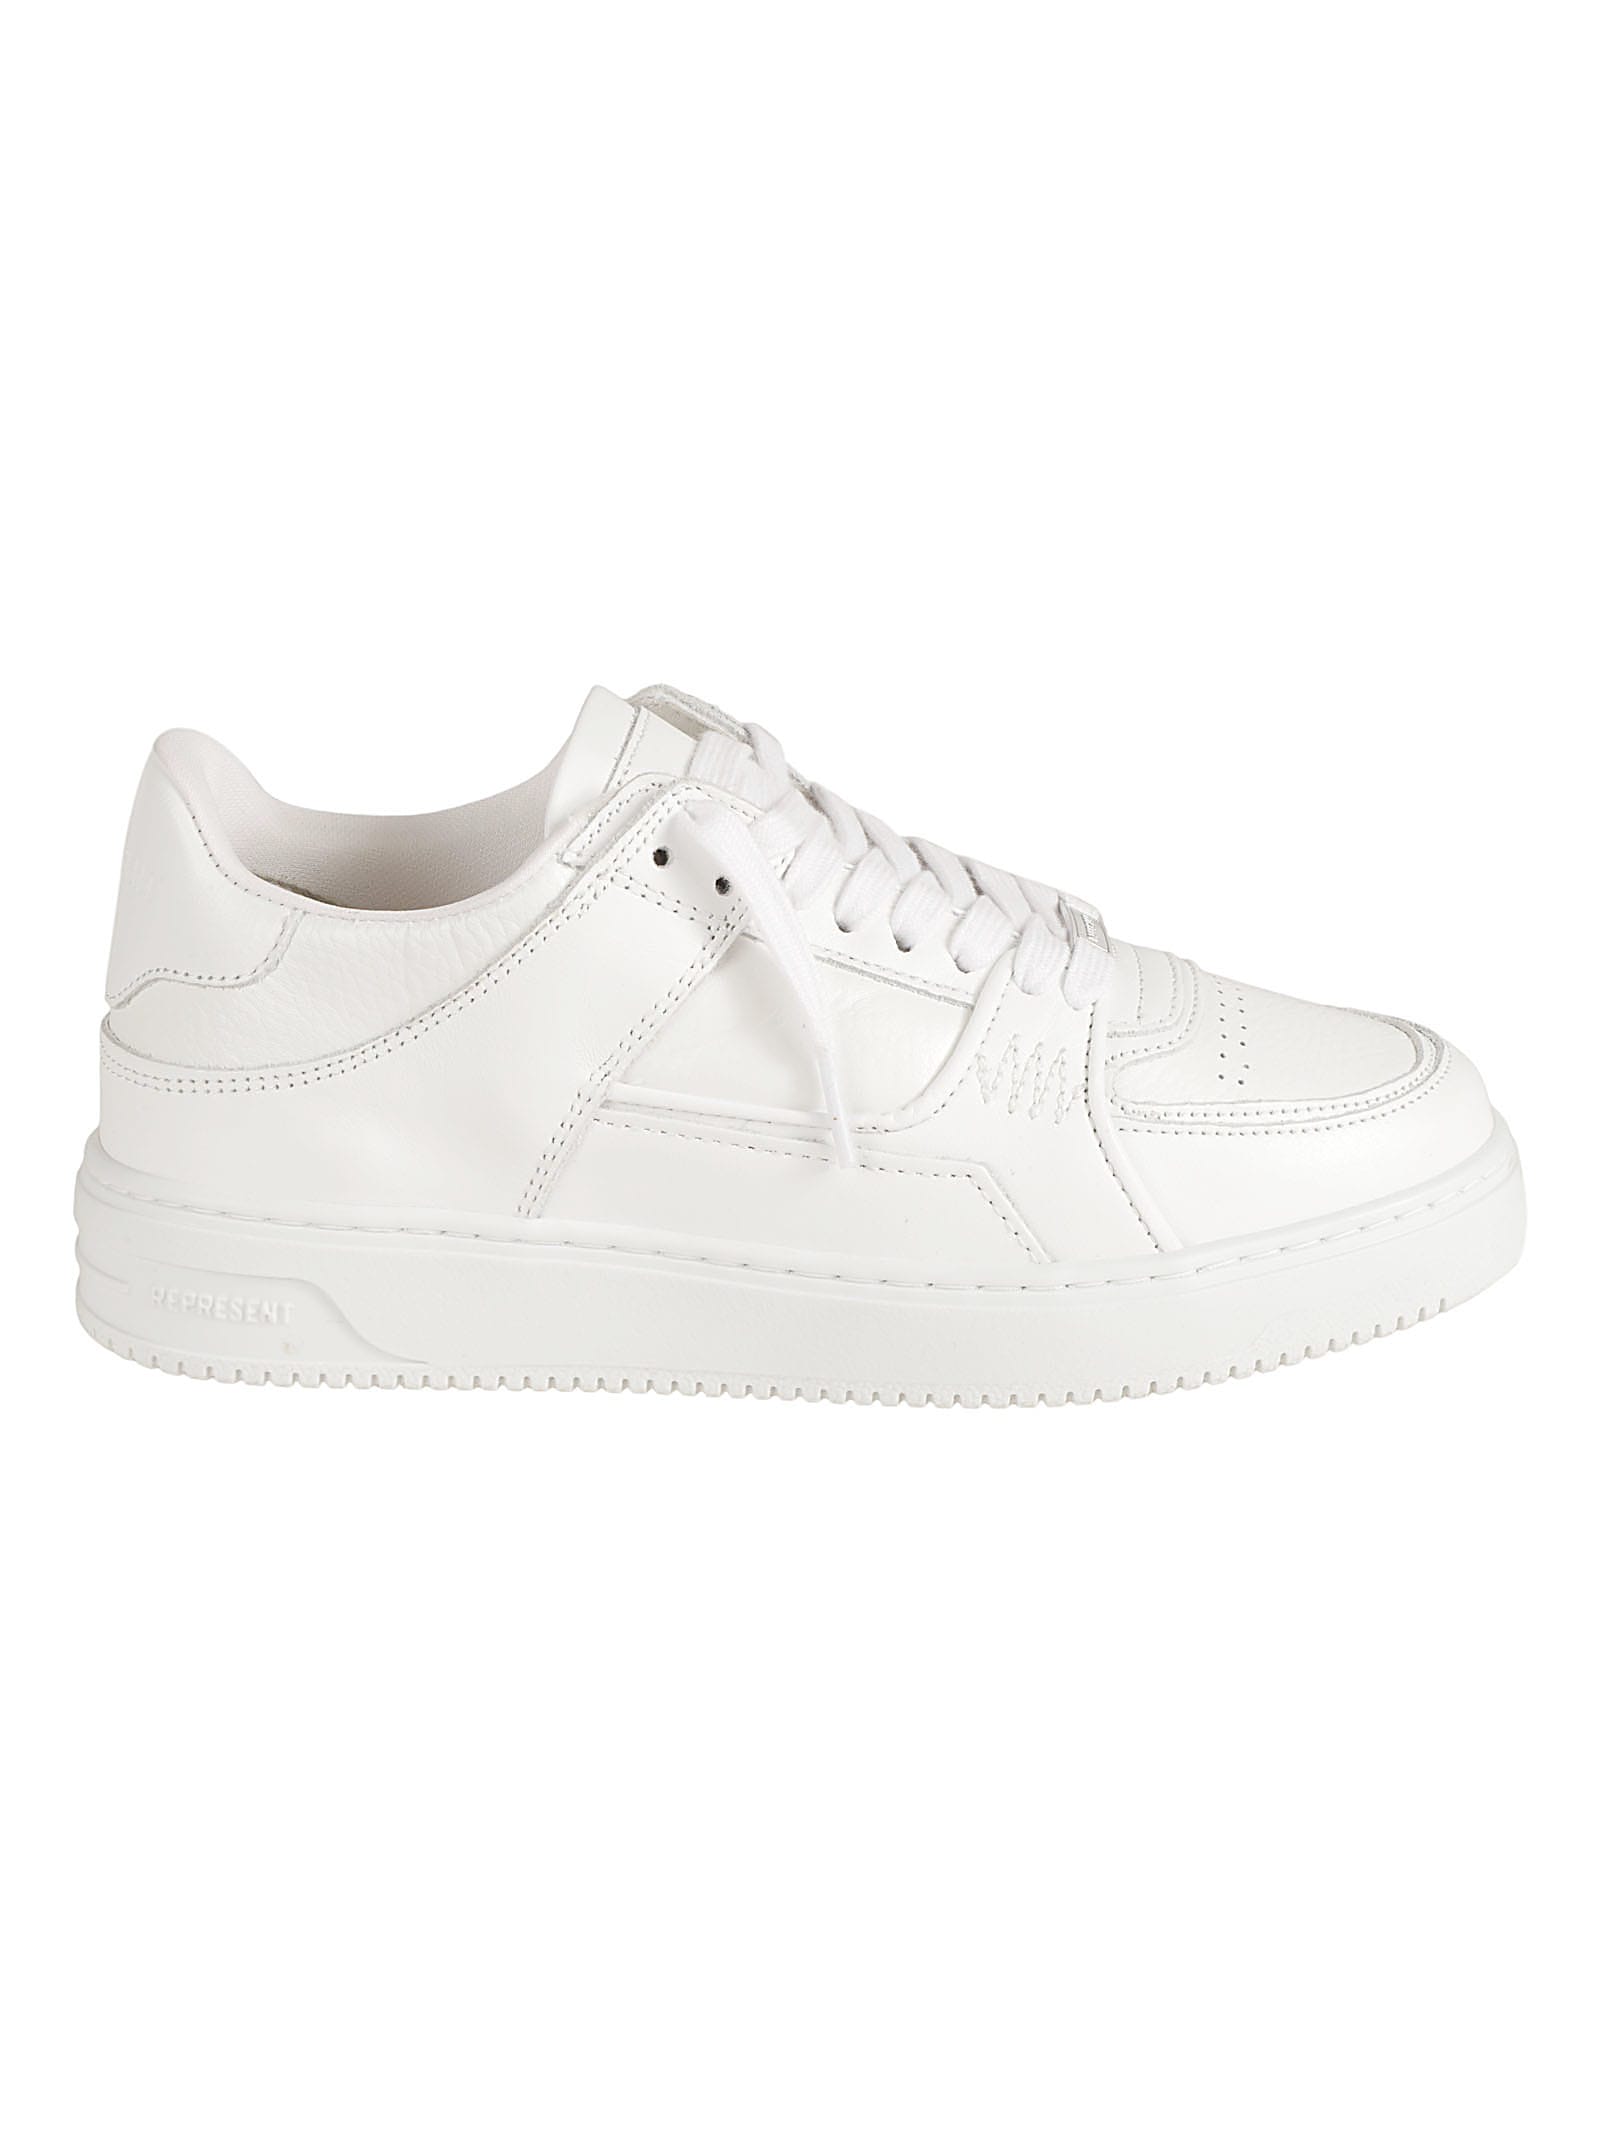 Represent Classic Low Lace-up Sneakers In Flat White